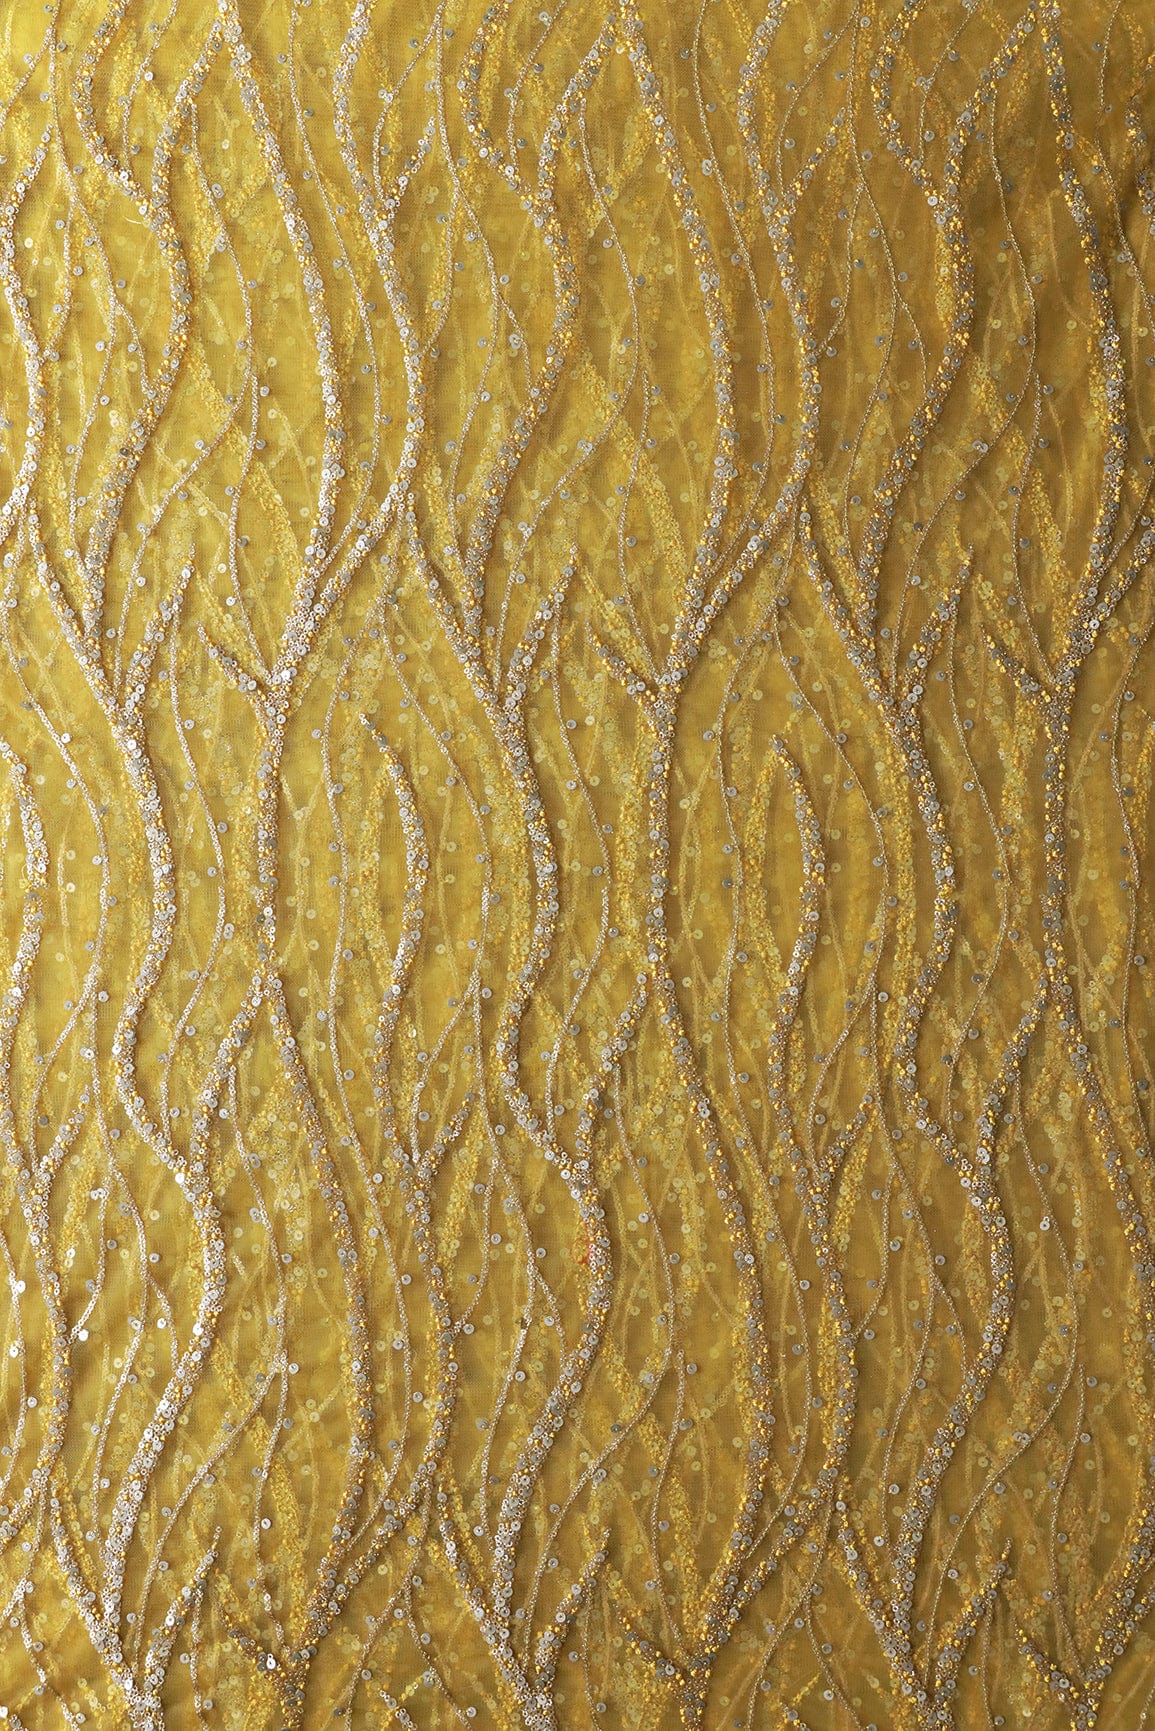 doeraa Embroidery Fabrics Gold And Silver Sequins With yellow Thread Wavy Embroidery Work On yellow Soft Net Fabric